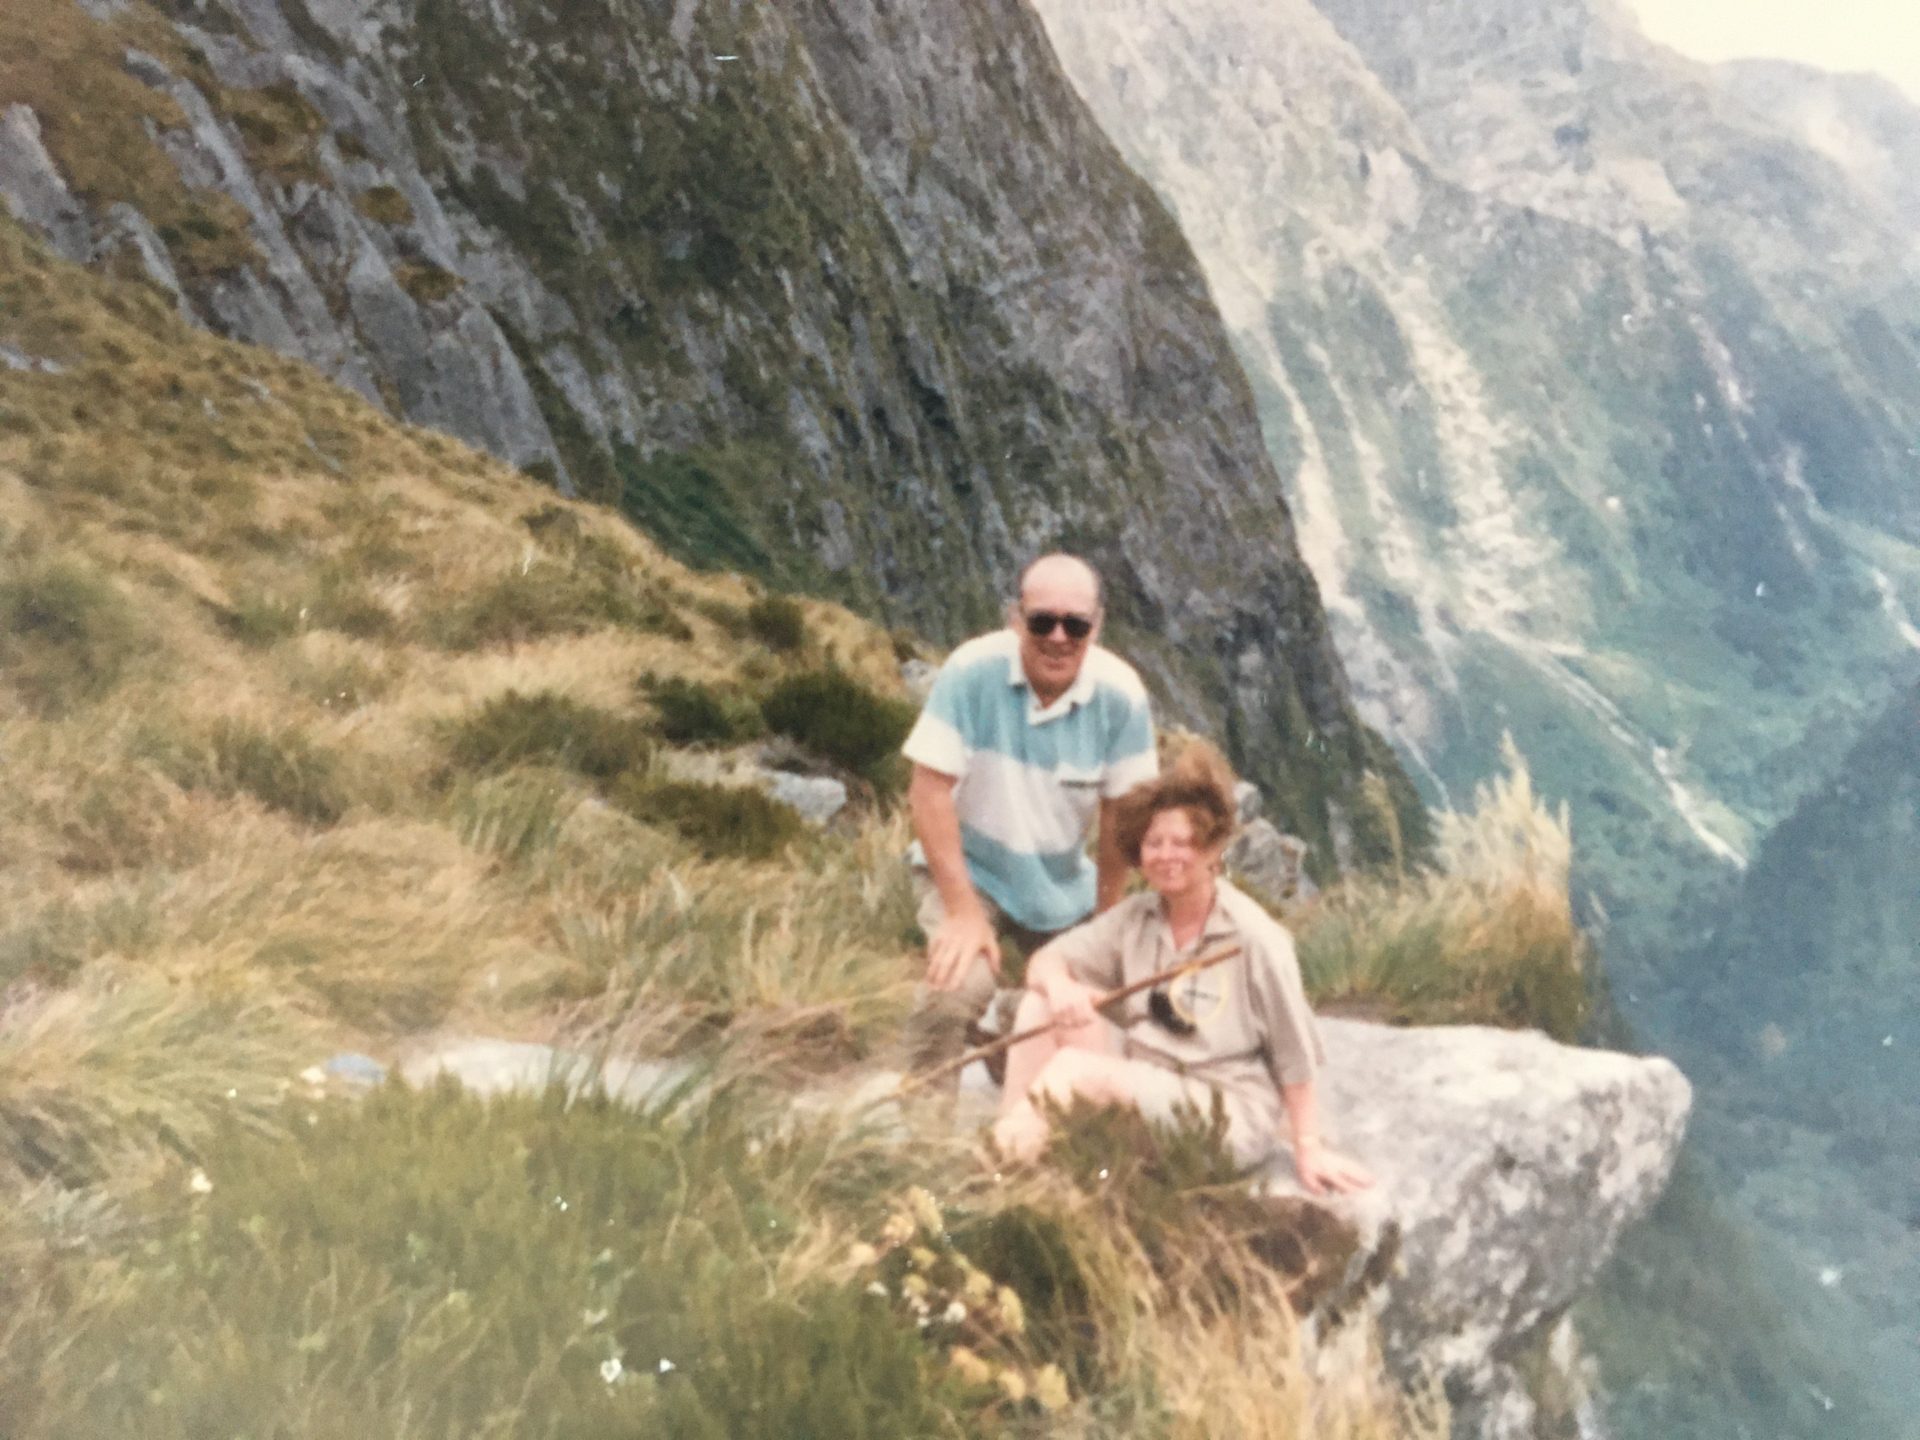 Dick and Thelma hiking in the mountains on their trip to China and Mongolia, July 1990